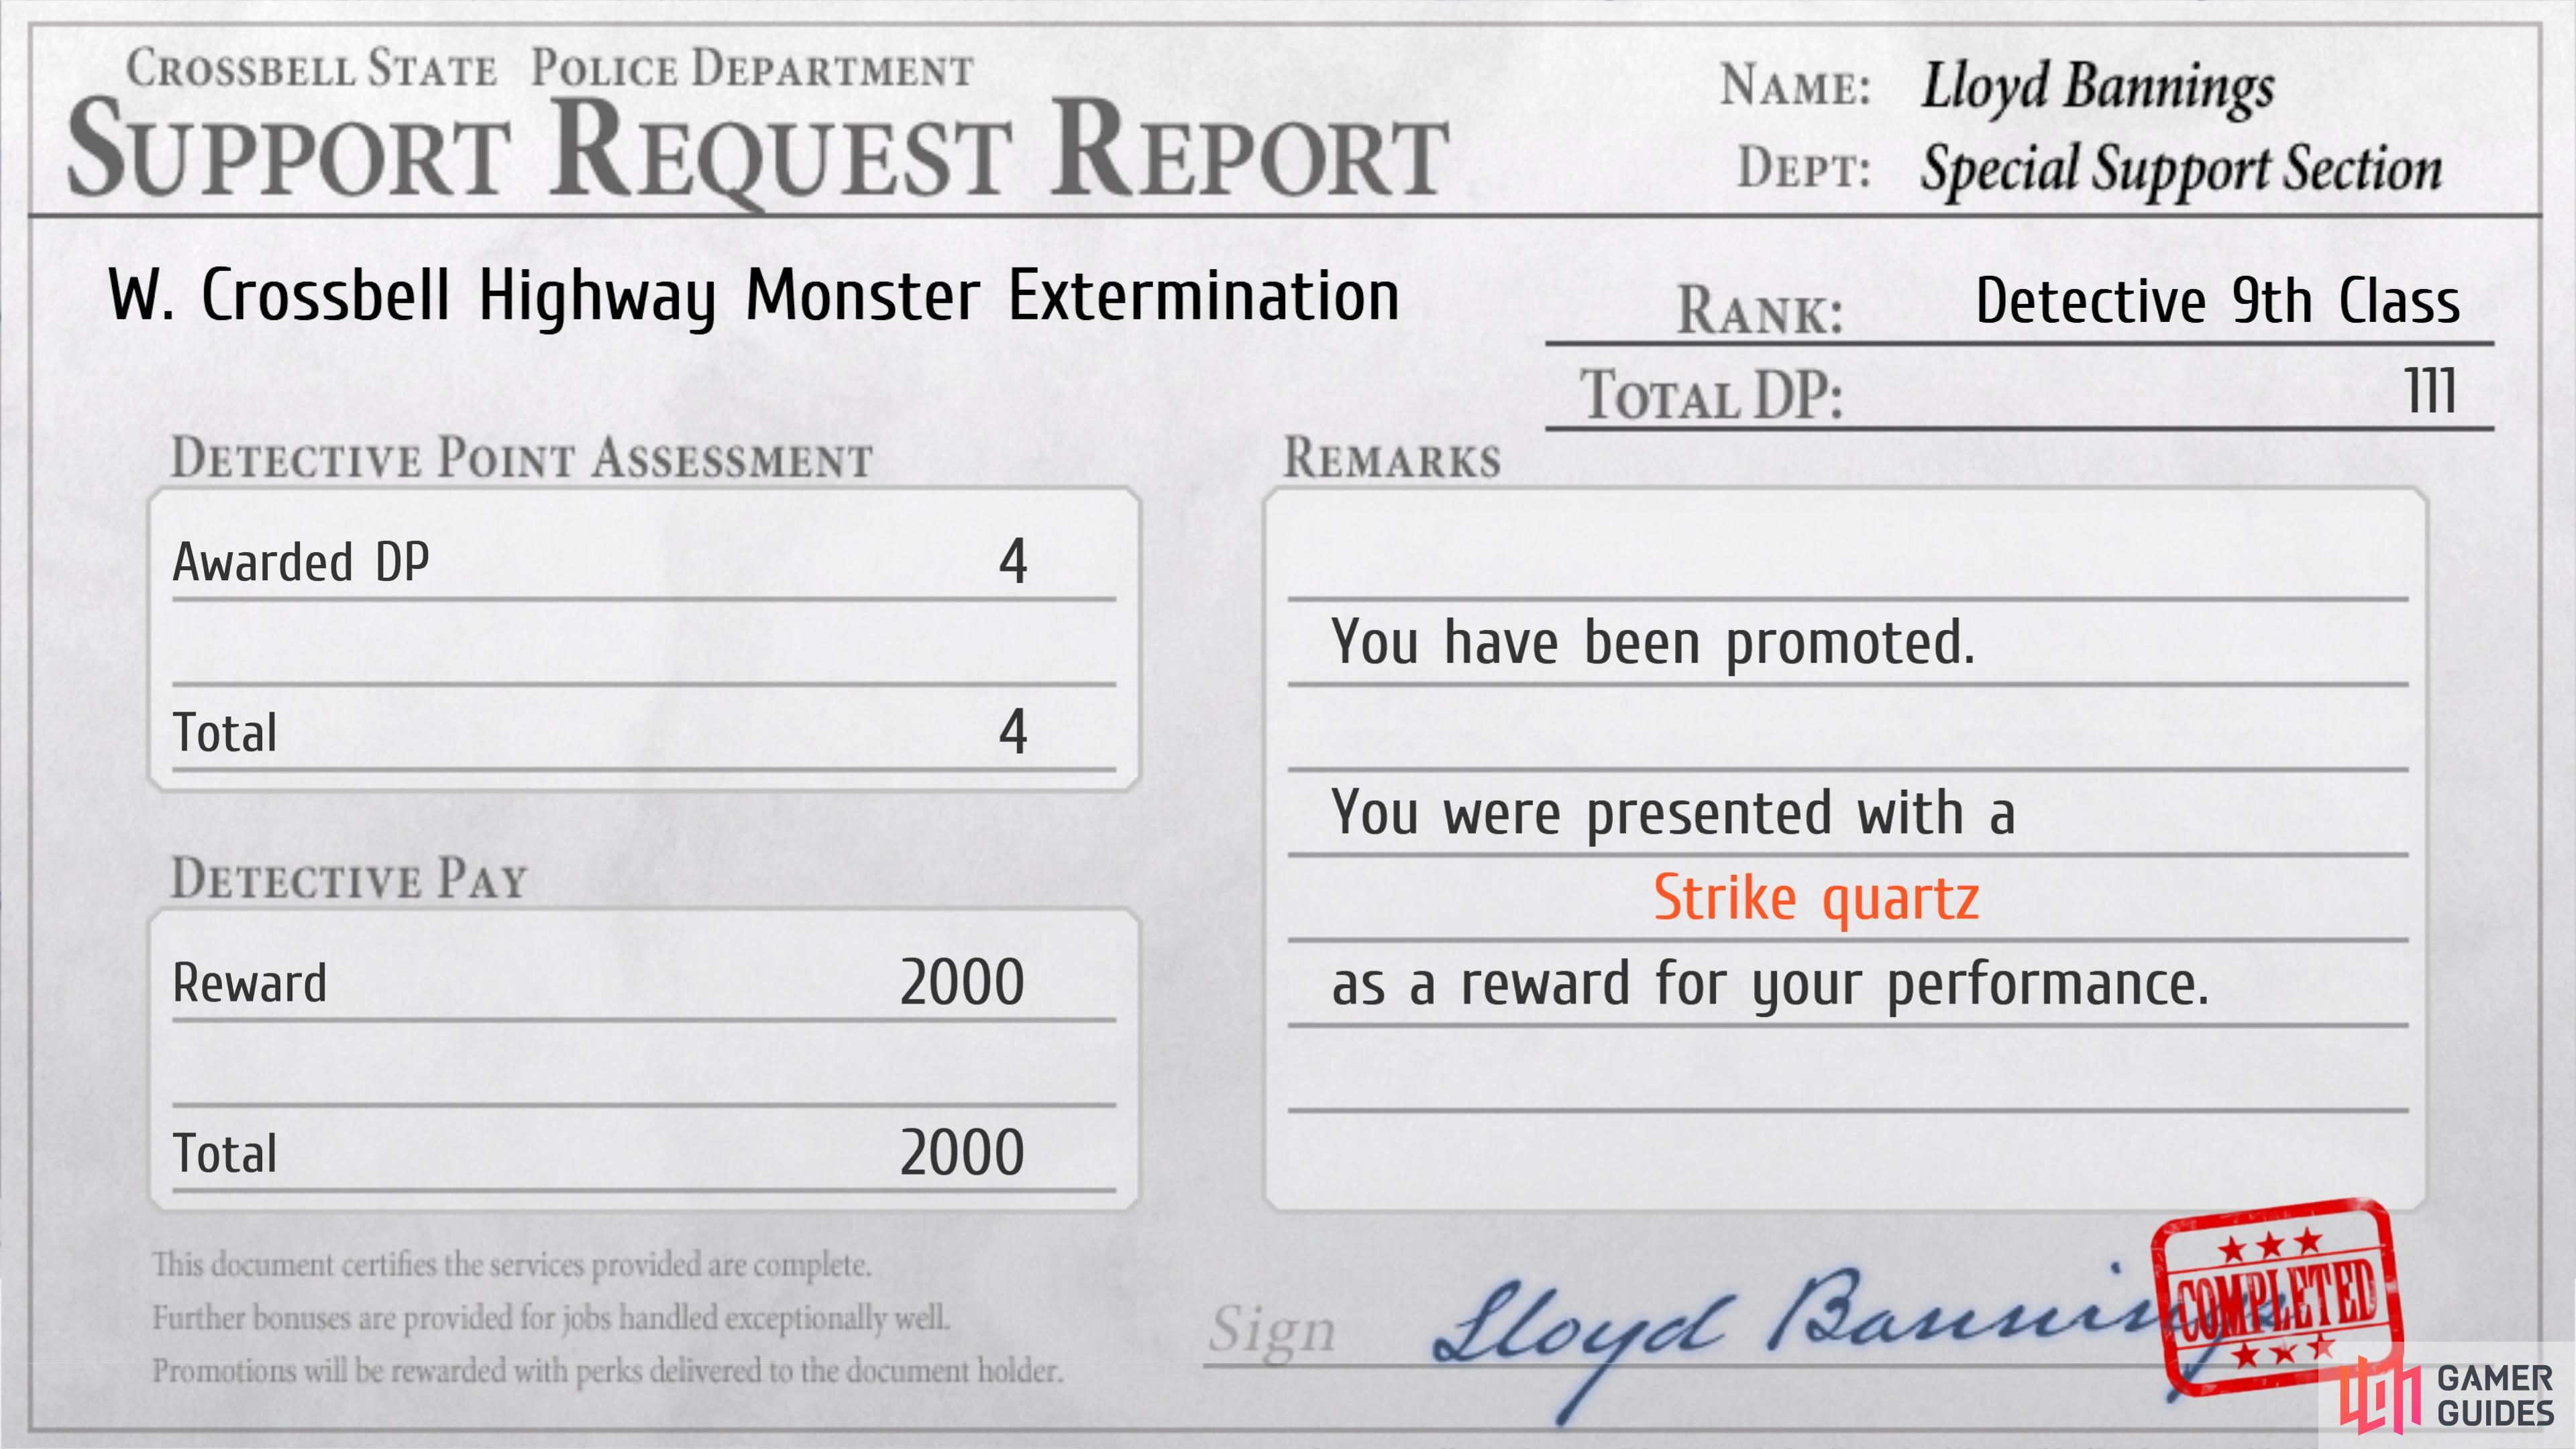 Report your Request completion at the computer to obtain the Strike Quartz